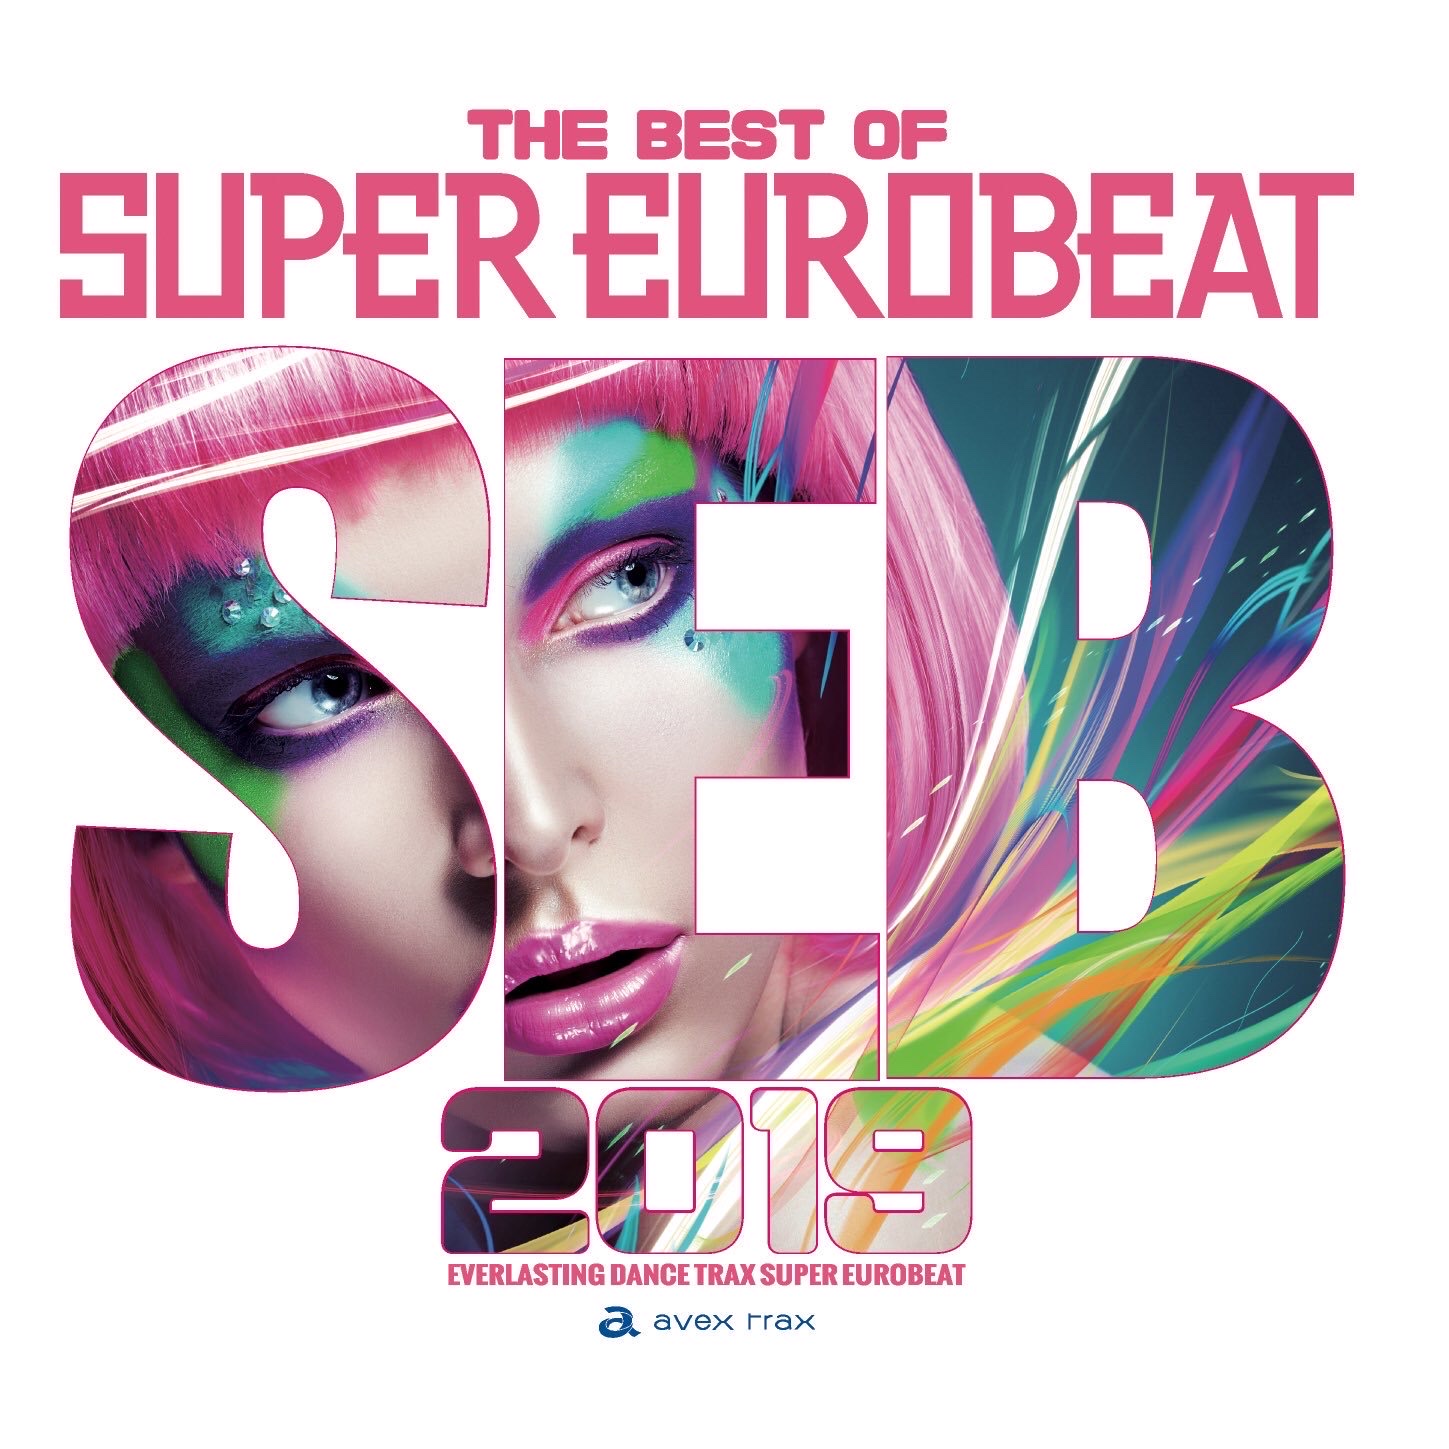 THE BEST OF SUPER EUROBEAT 2019 disc1レビュー - 痛めの語り